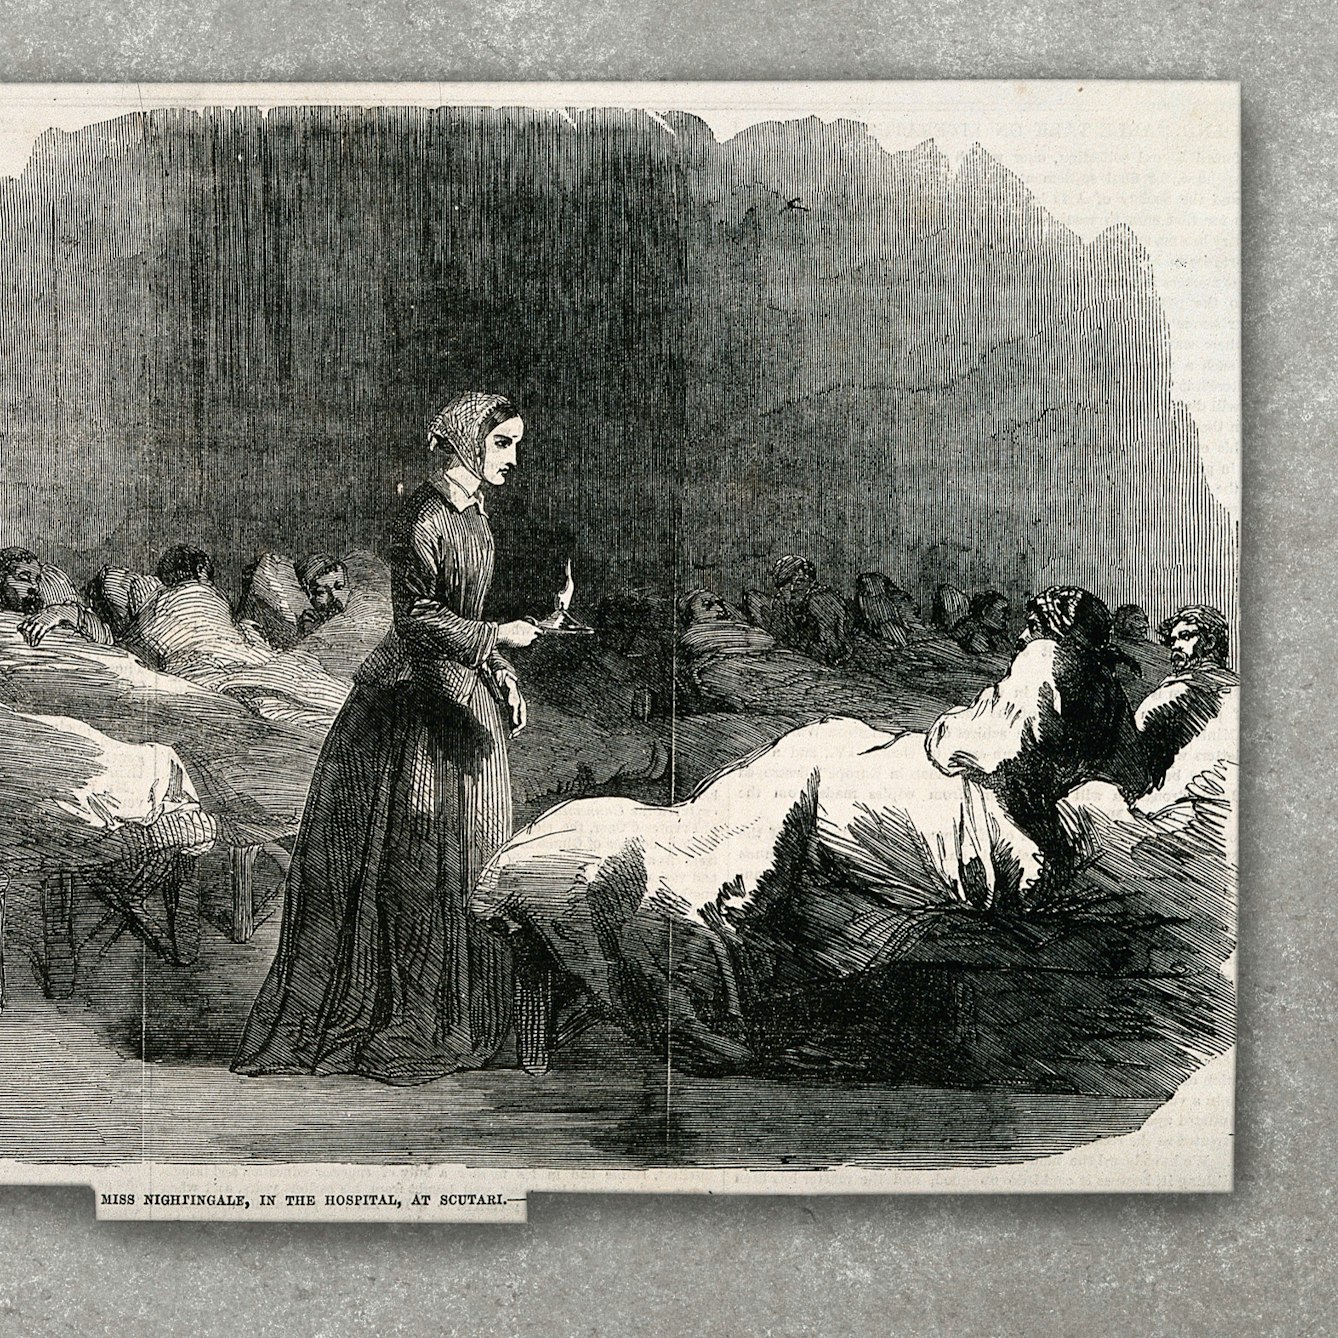 A black and white wood engraving of Florence Nightingale, surrounded by patients in hospital beds, photographed on a concrete textured background.